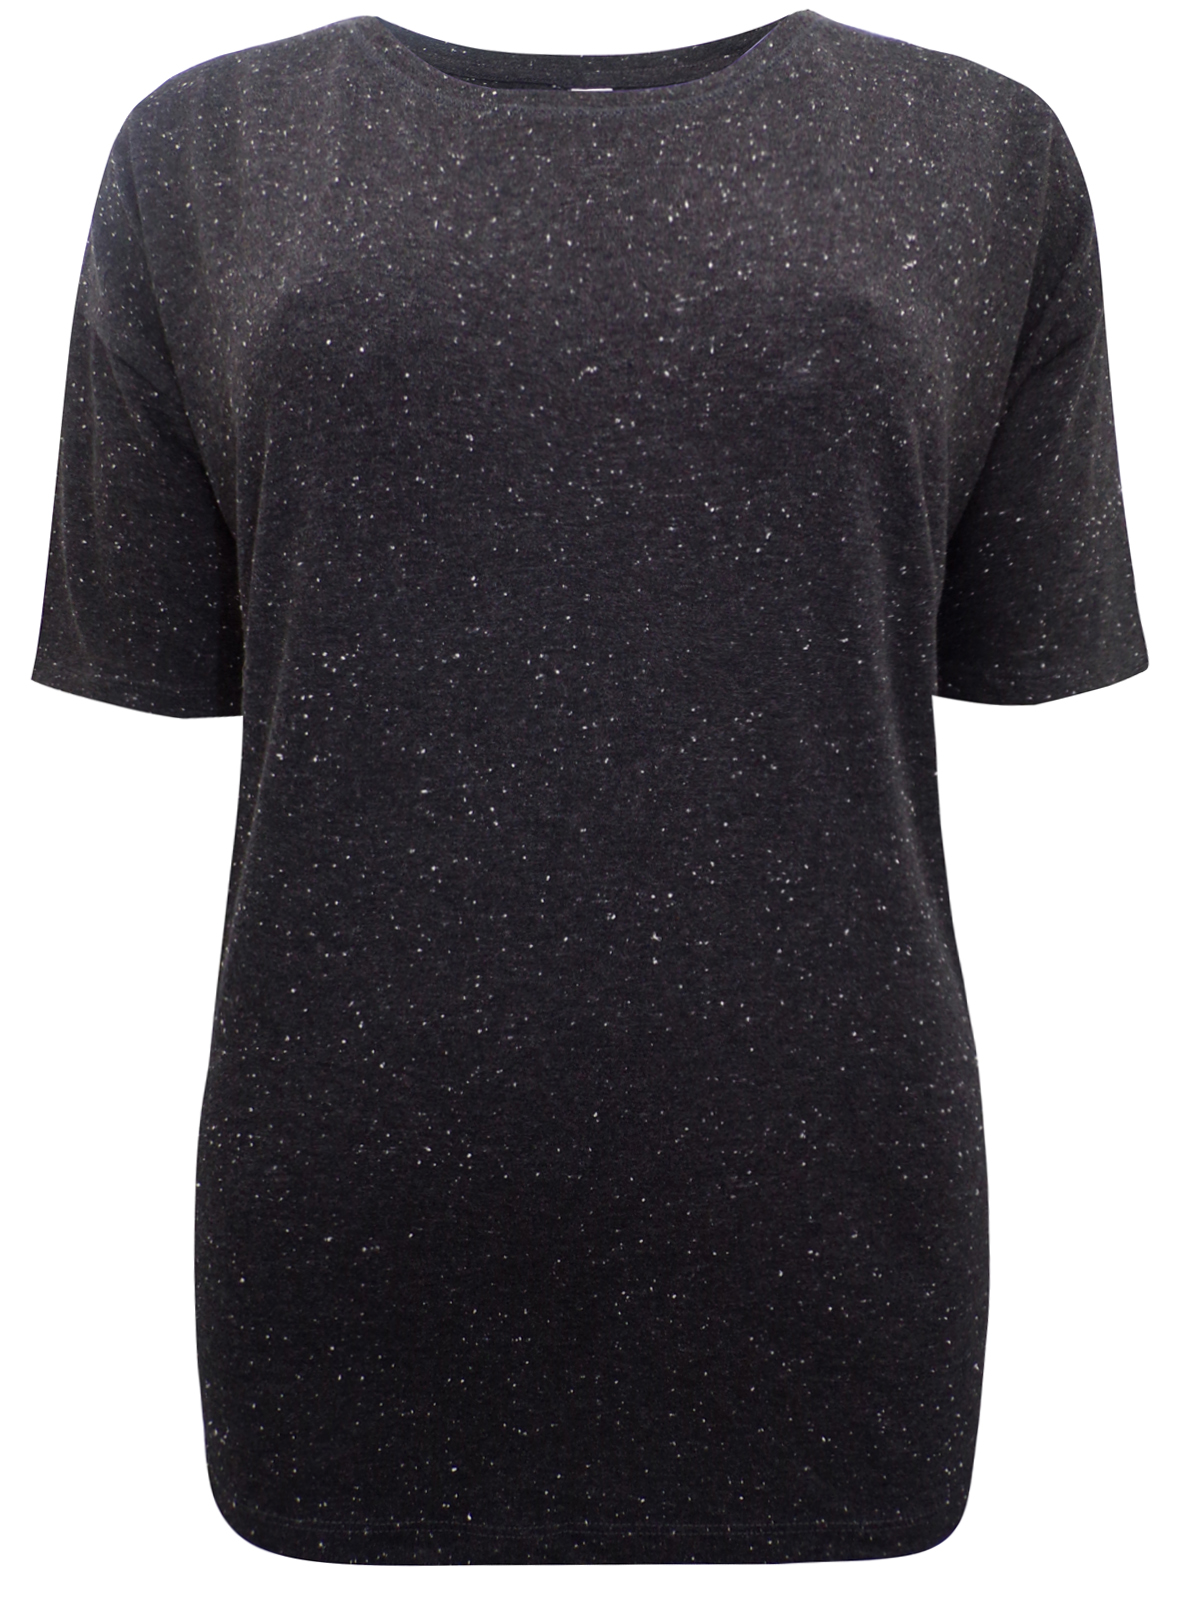 S.Oliver - Triangle - - S.Oliver GREY Cotton Rich Speckled T-Shirt ...